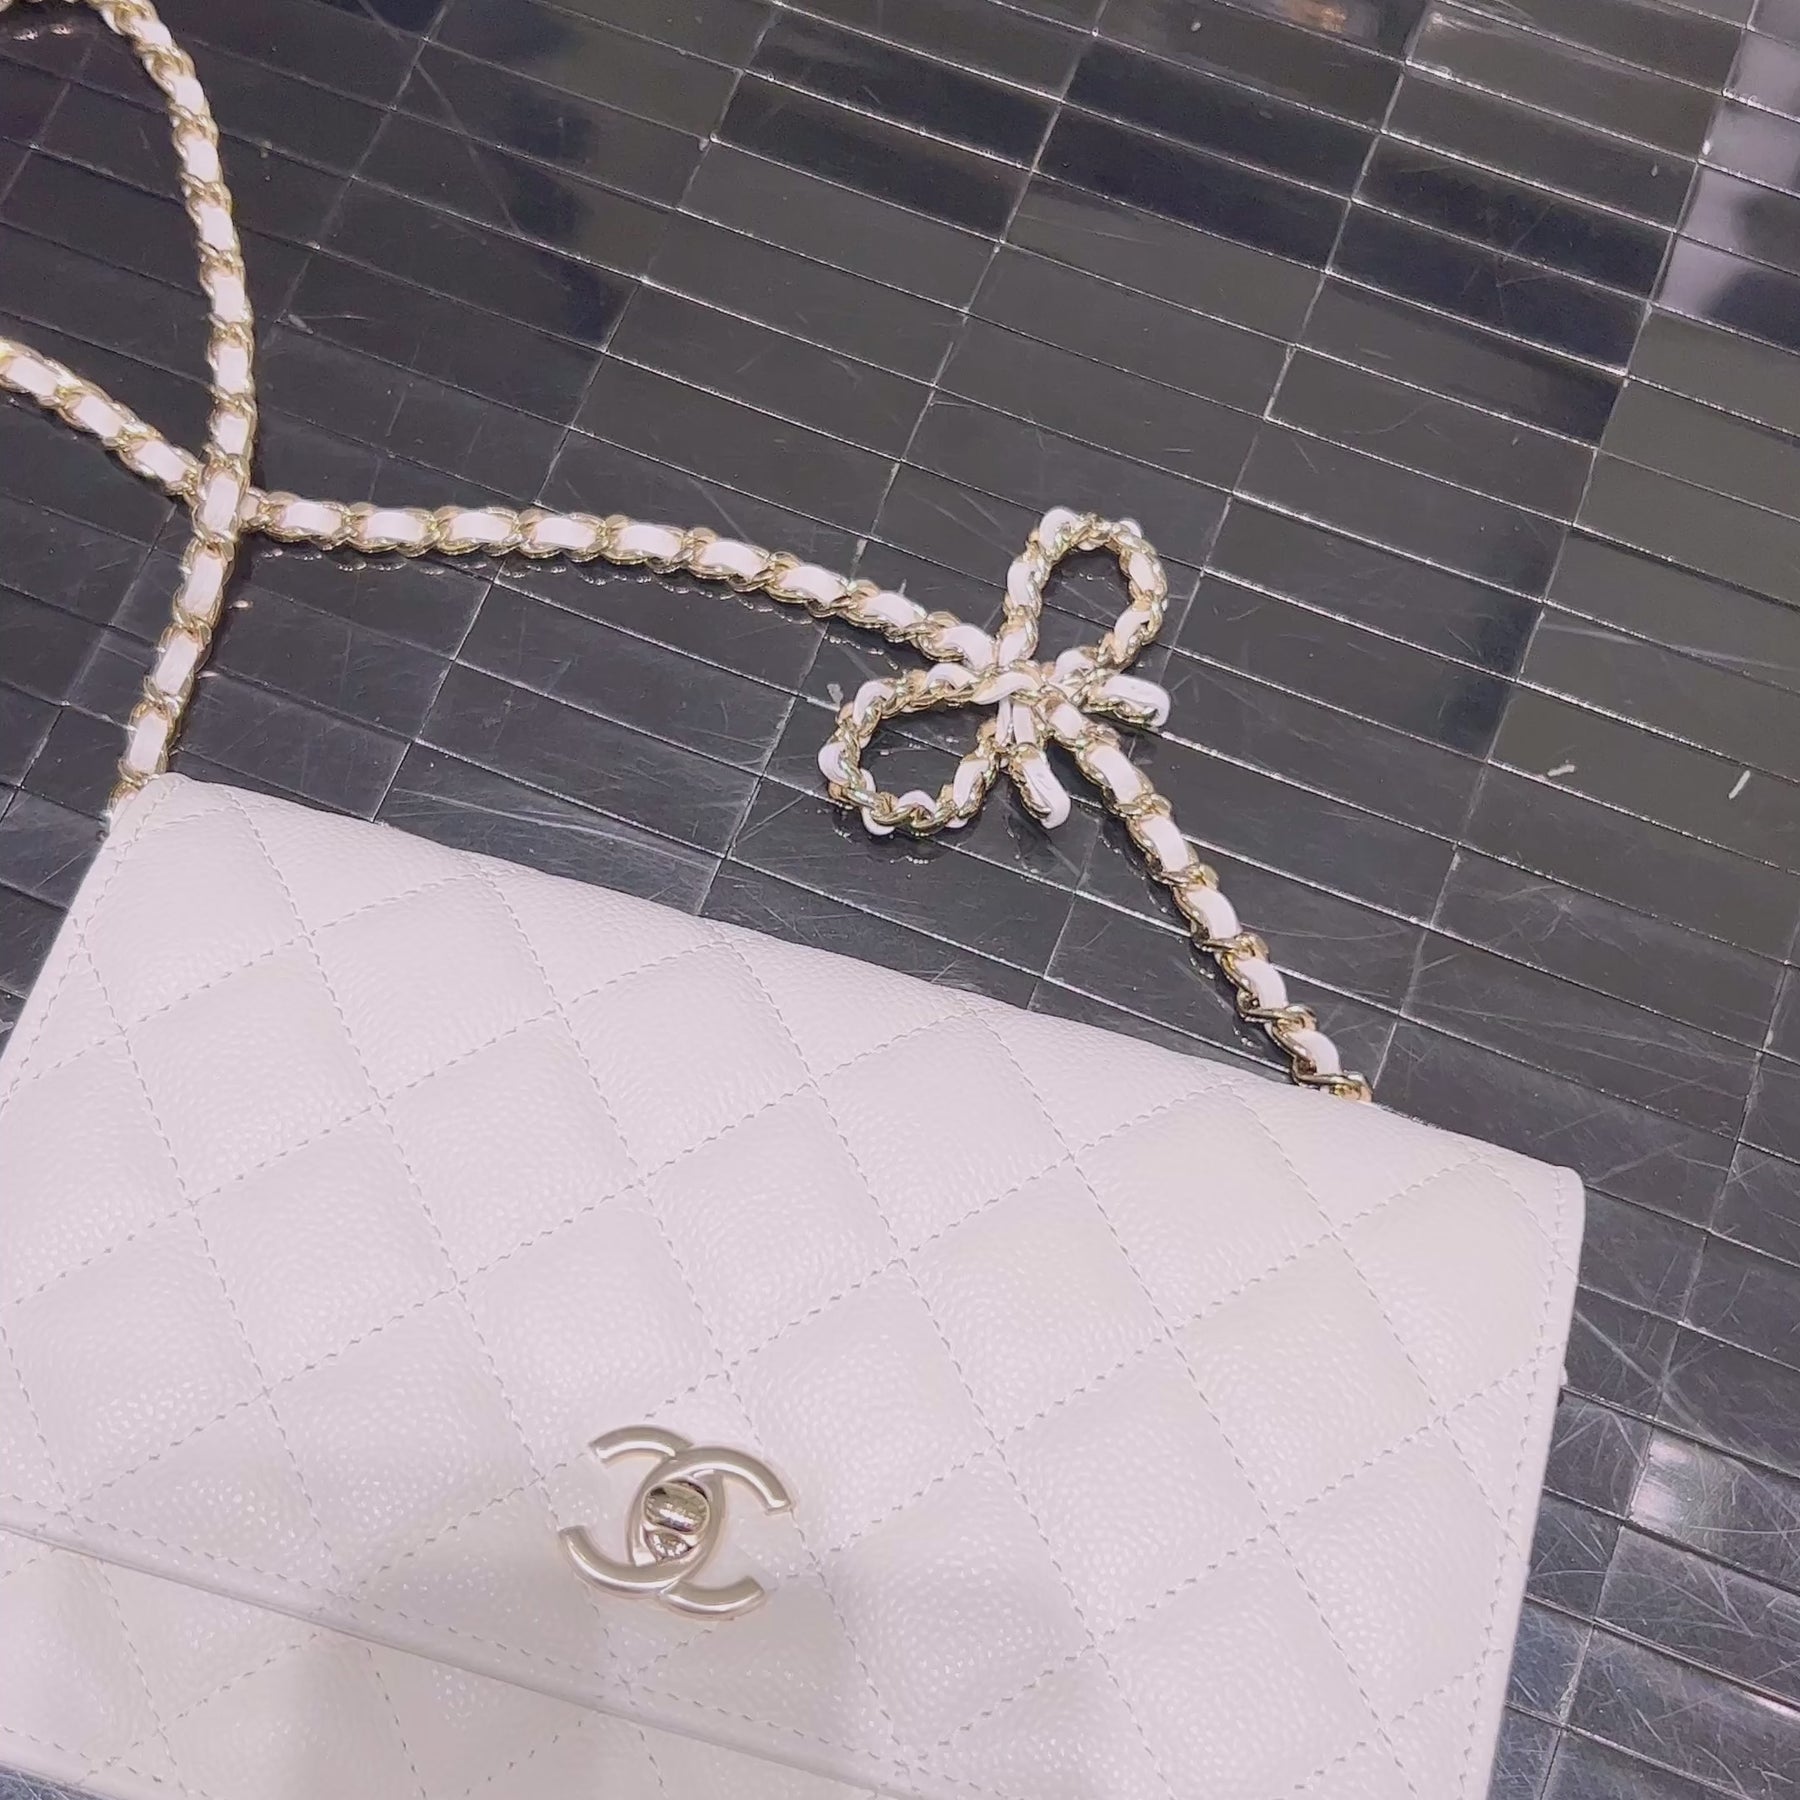 chanel woc protector